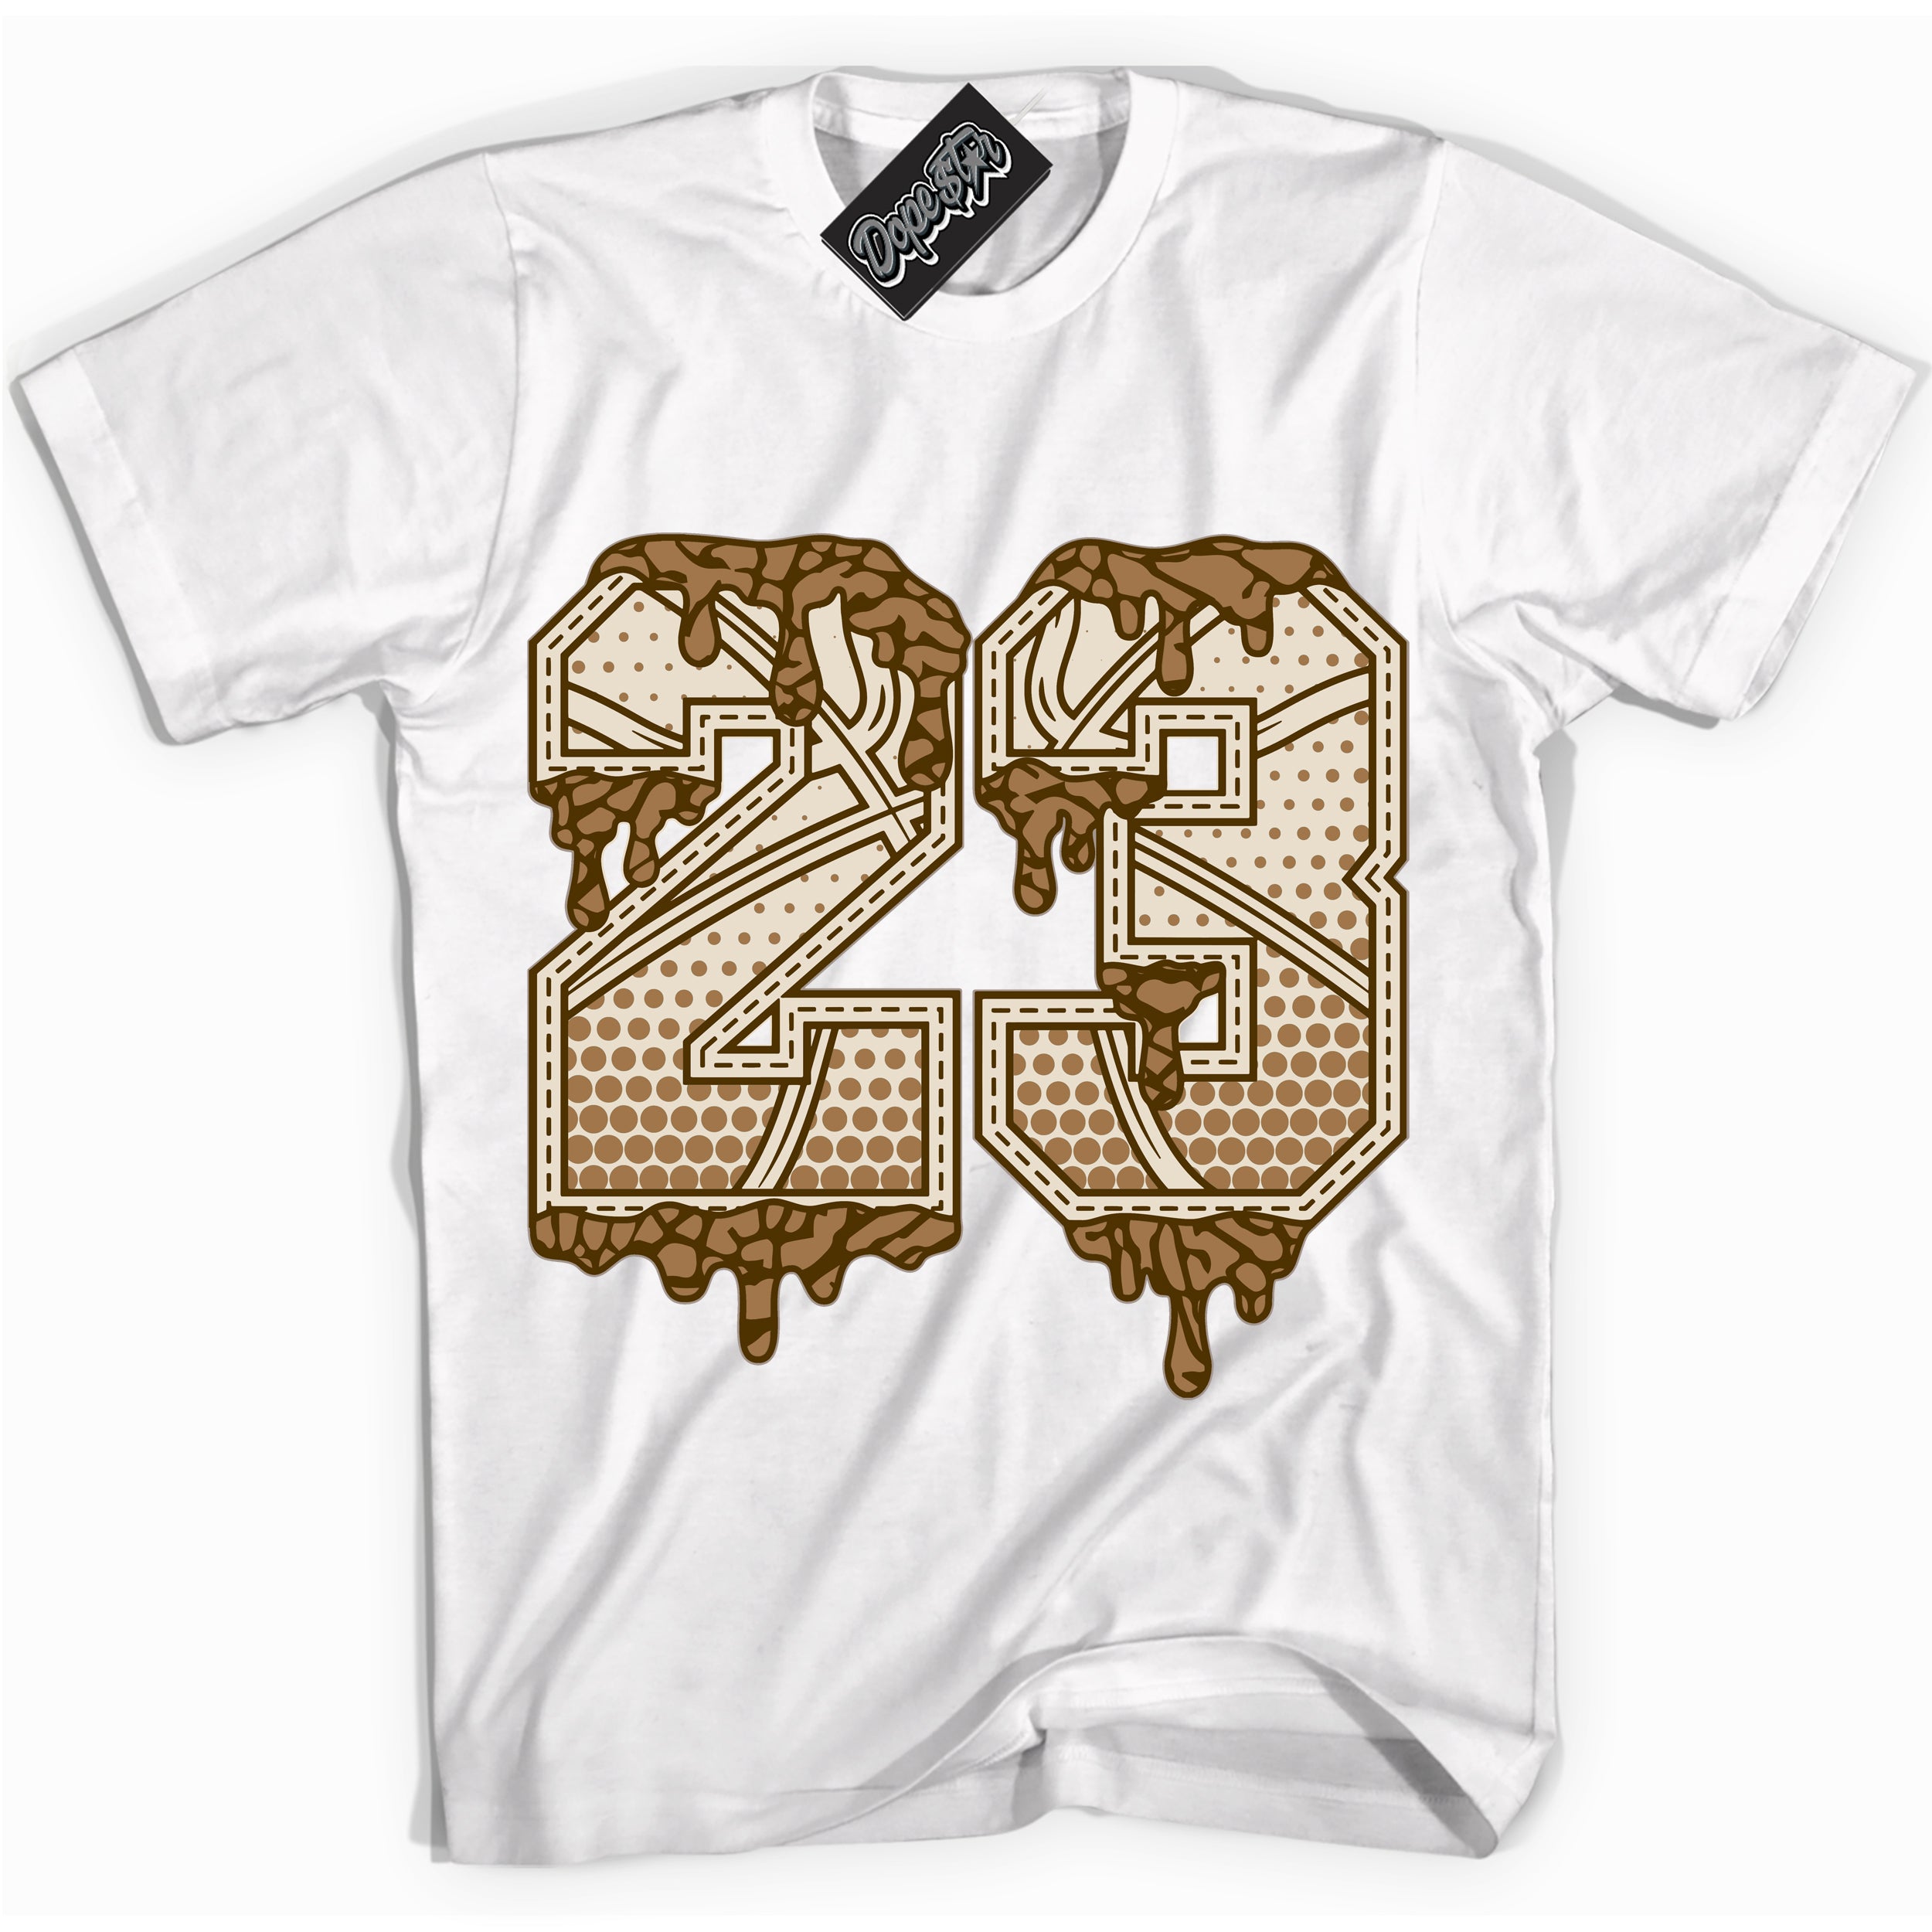 Cool White graphic tee with “ 23 Ball ” design, that perfectly matches Palomino 3s sneakers 